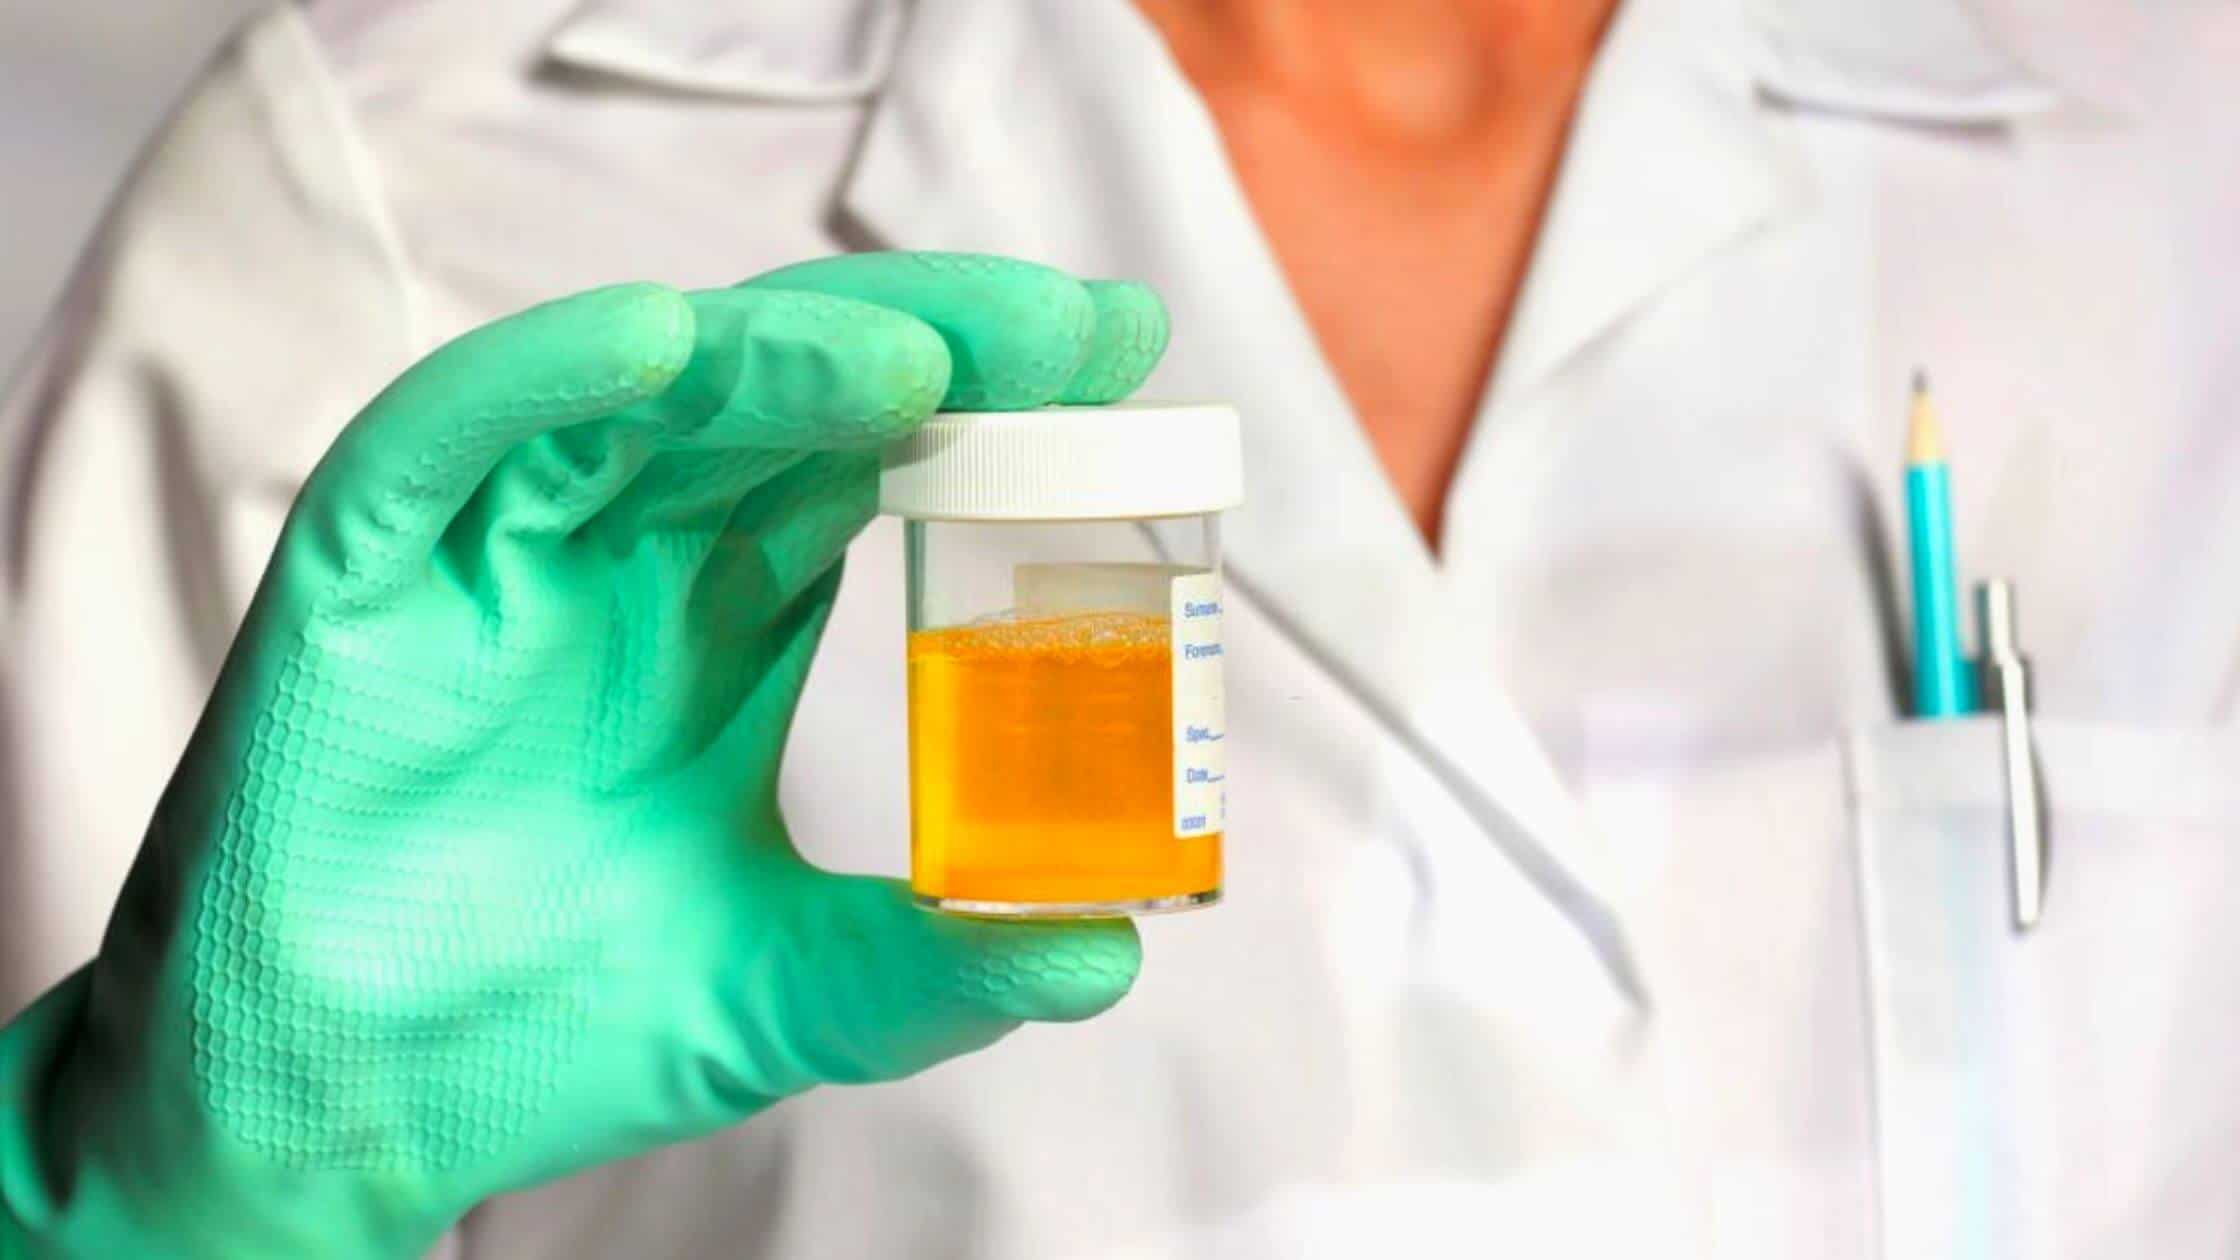 Simple Urine Test Could Enhance Cystic Fibrosis Treatment